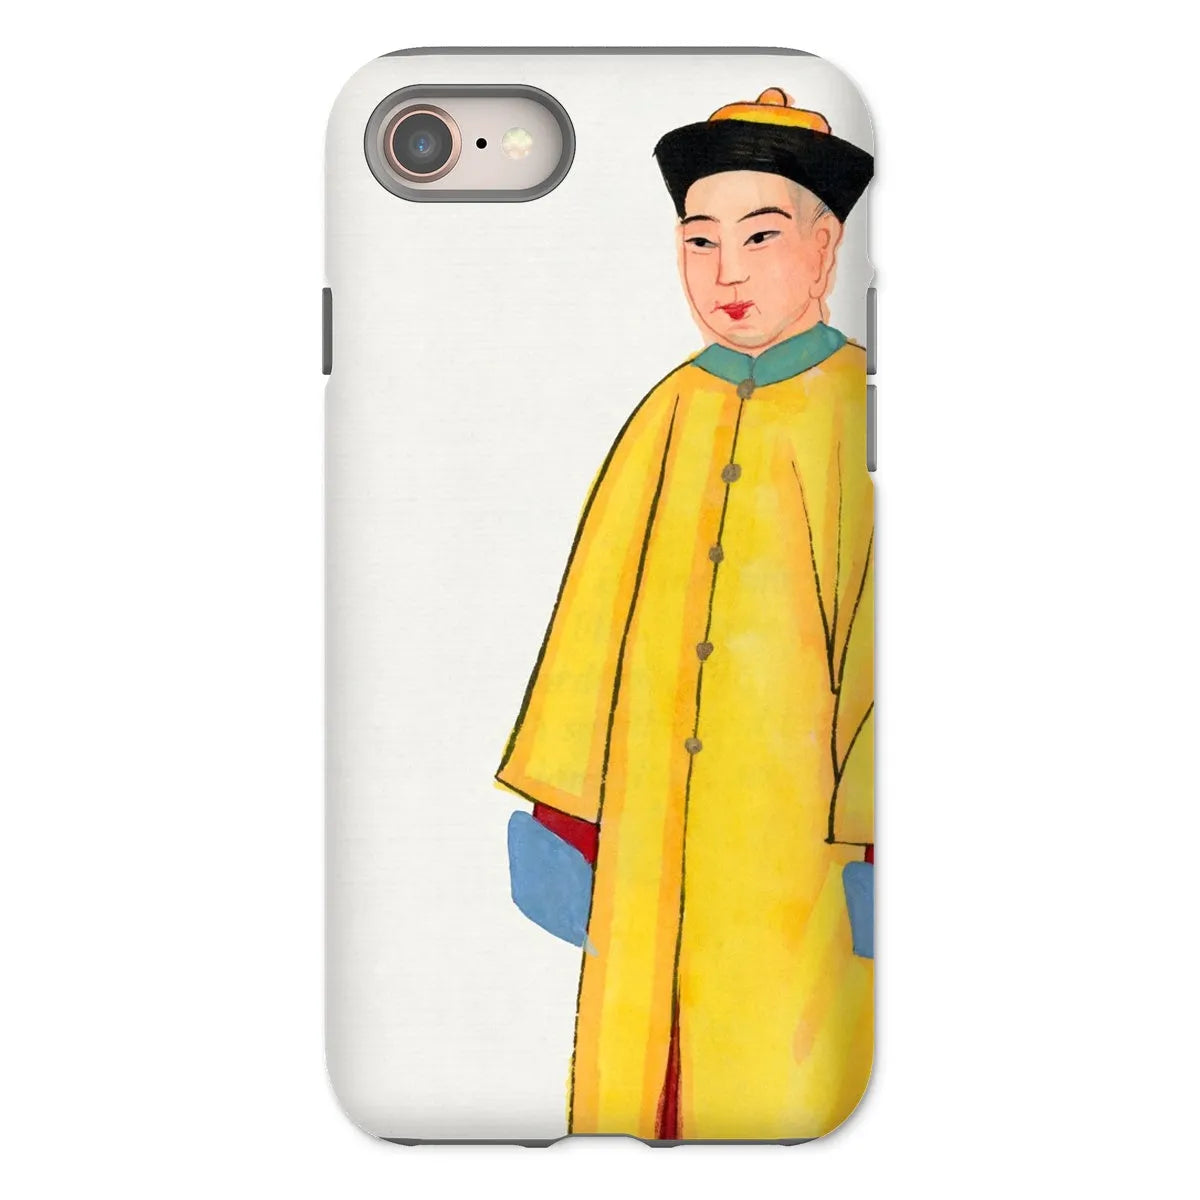 Priest In Yellow Robes - Chinese Aesthetic Art Phone Case - Iphone 8 / Matte - Mobile Phone Cases - Aesthetic Art